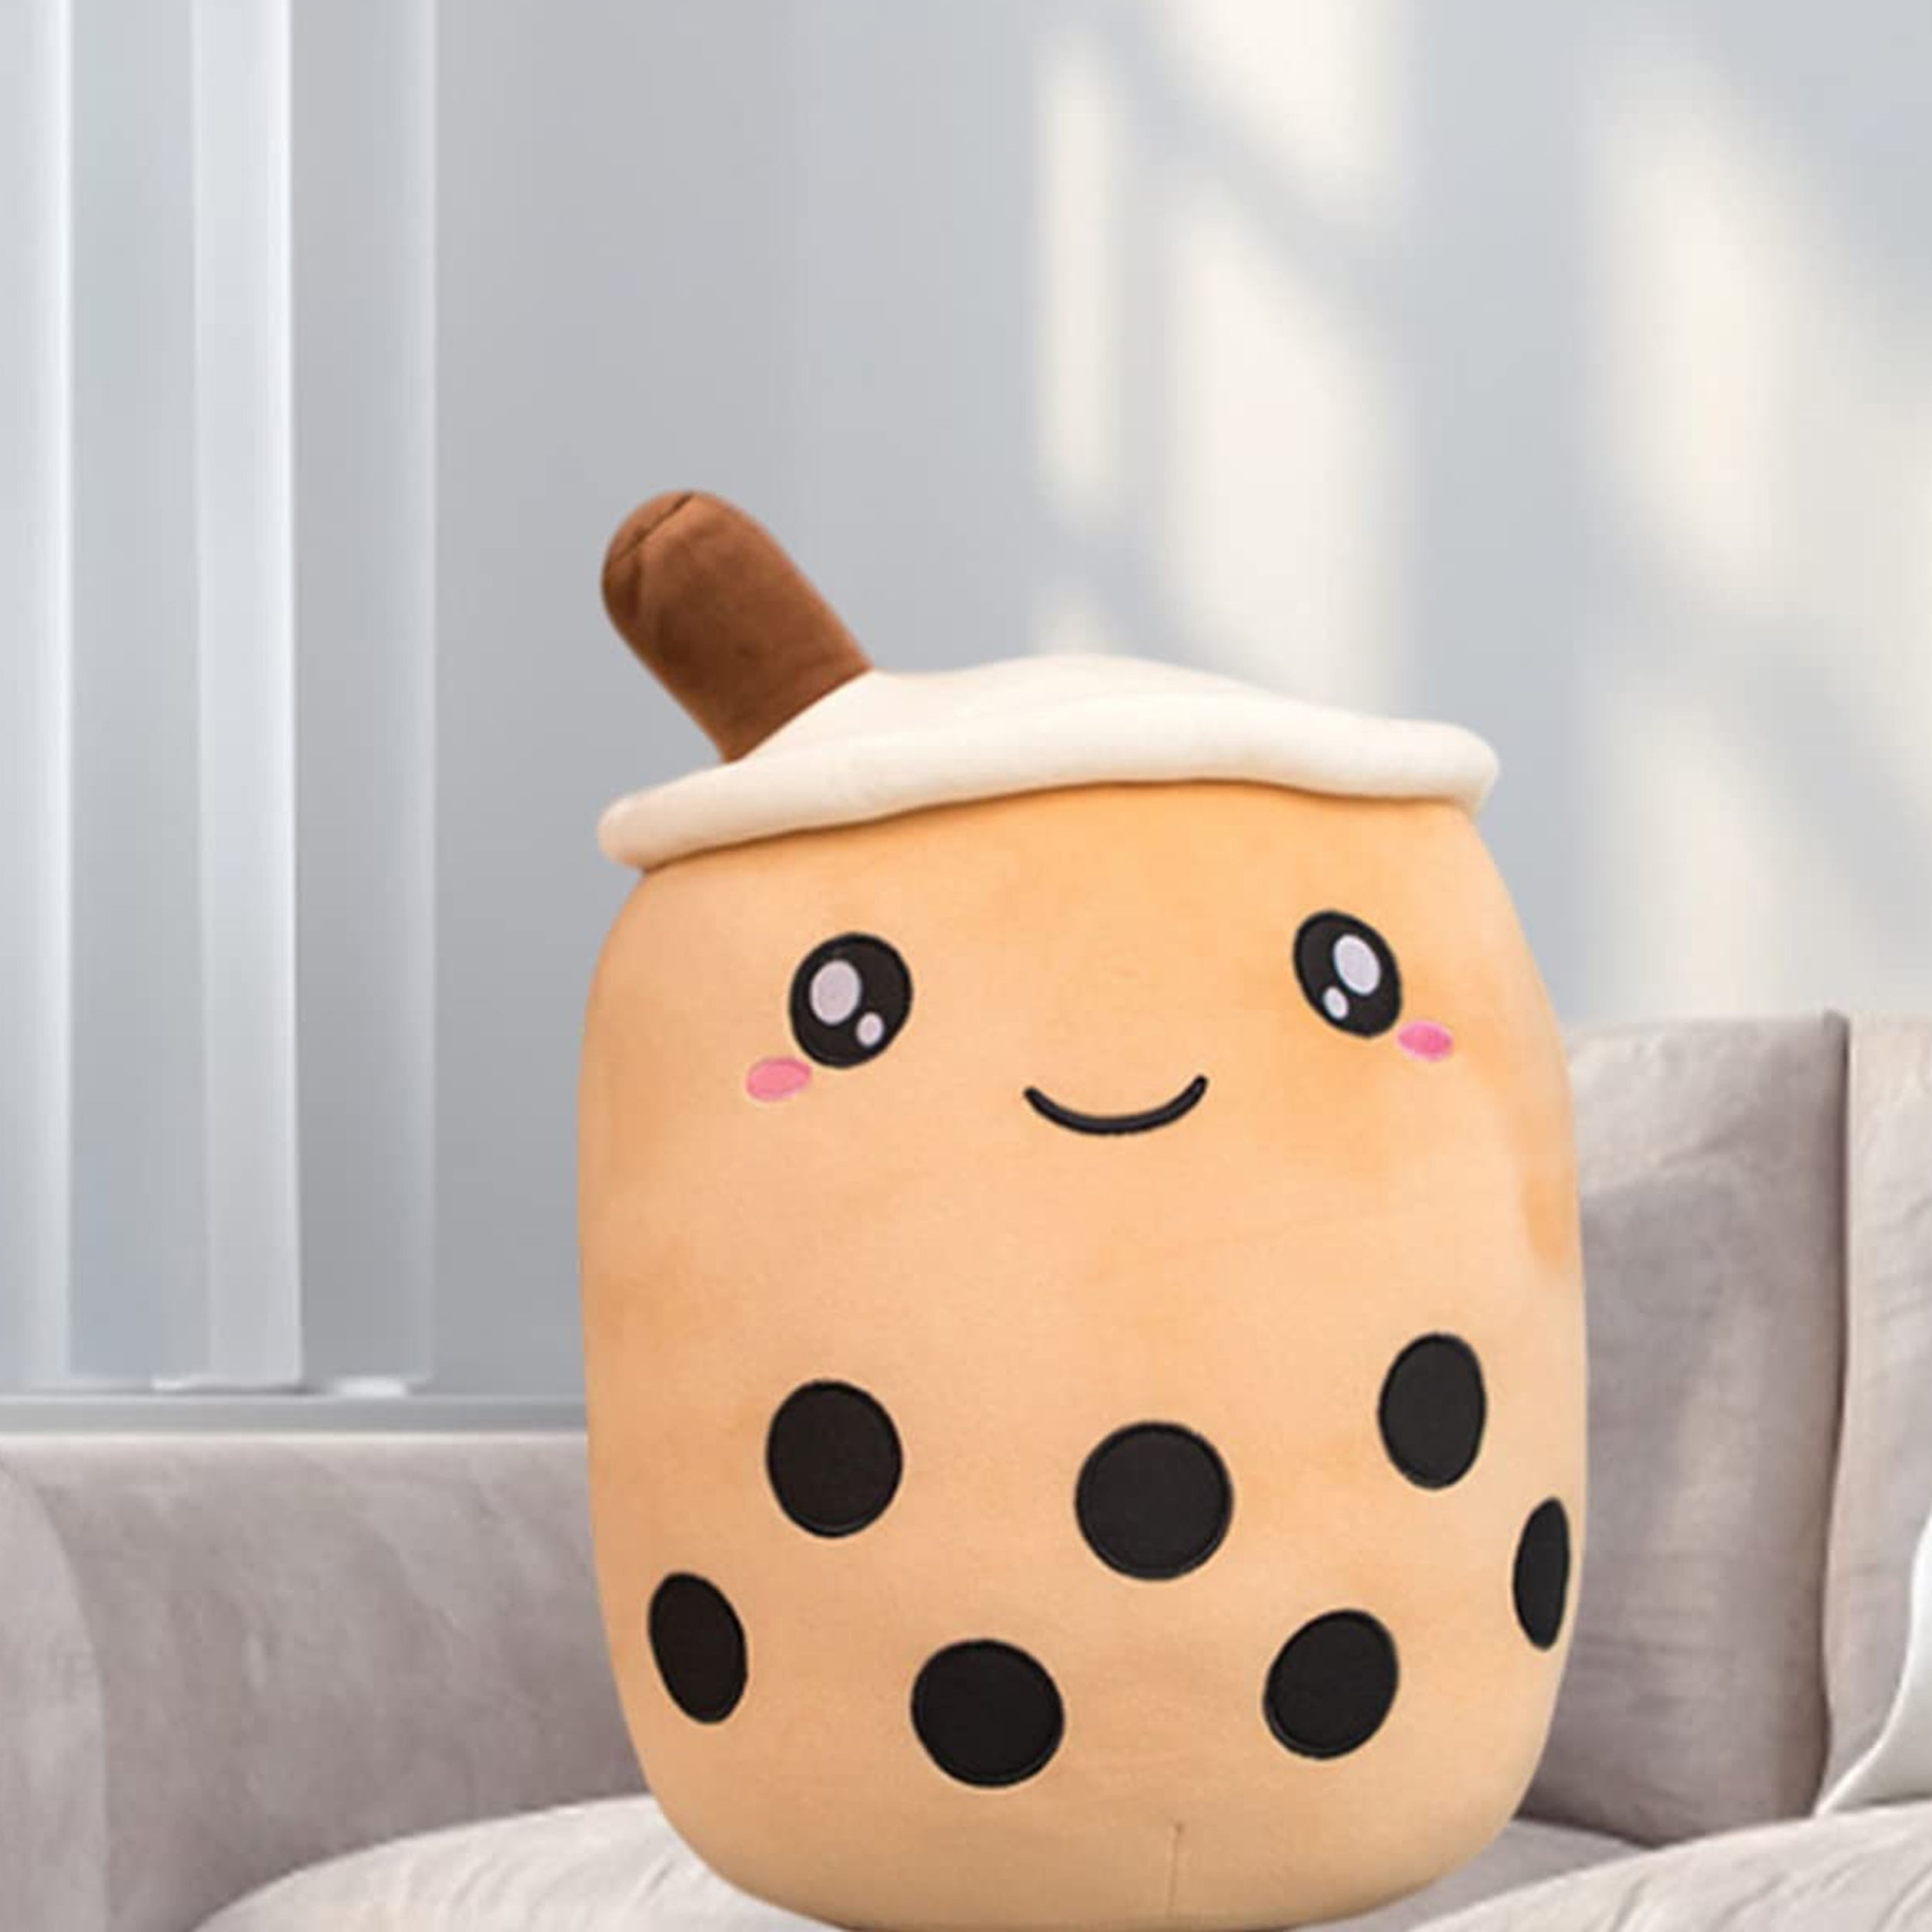 Cute and Cuddly Soft Emotion Milk Tea Plush Toy - Perfect Playtime Companion for Your Furry Friend